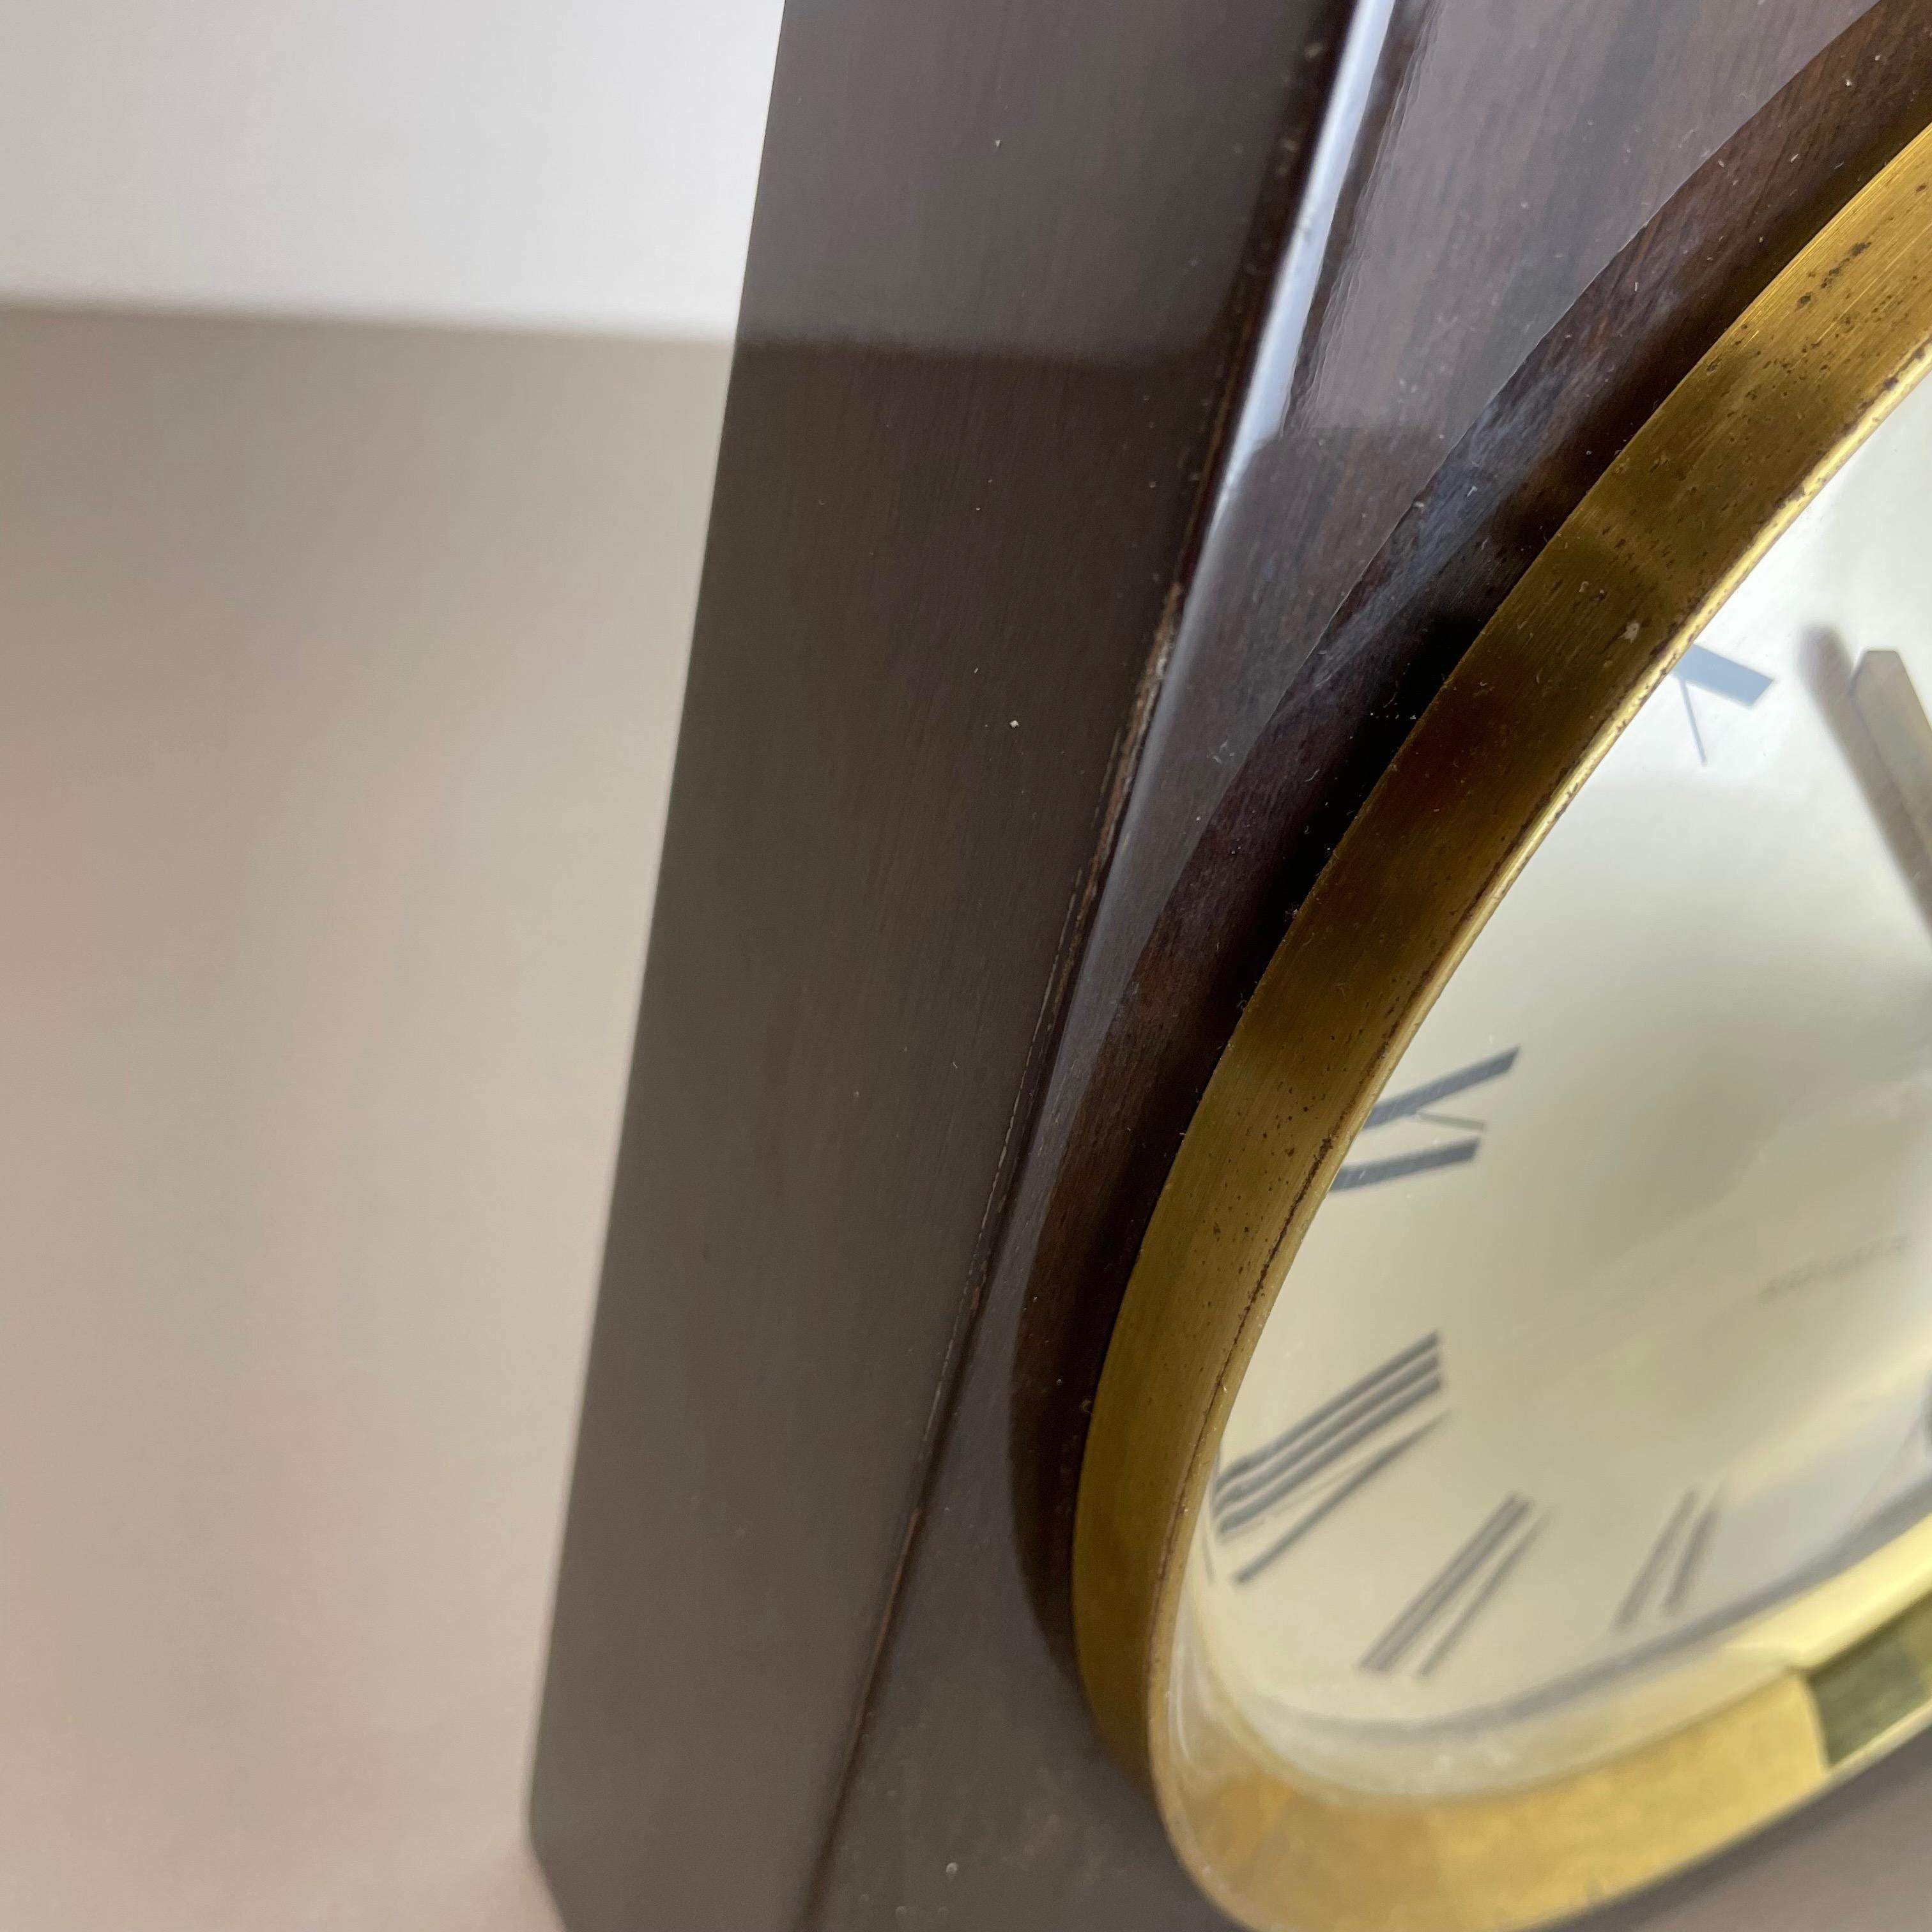 Vintage Modernist Wood + Brass Table and Wall Clock by Junghans, Germany, 1970s For Sale 6